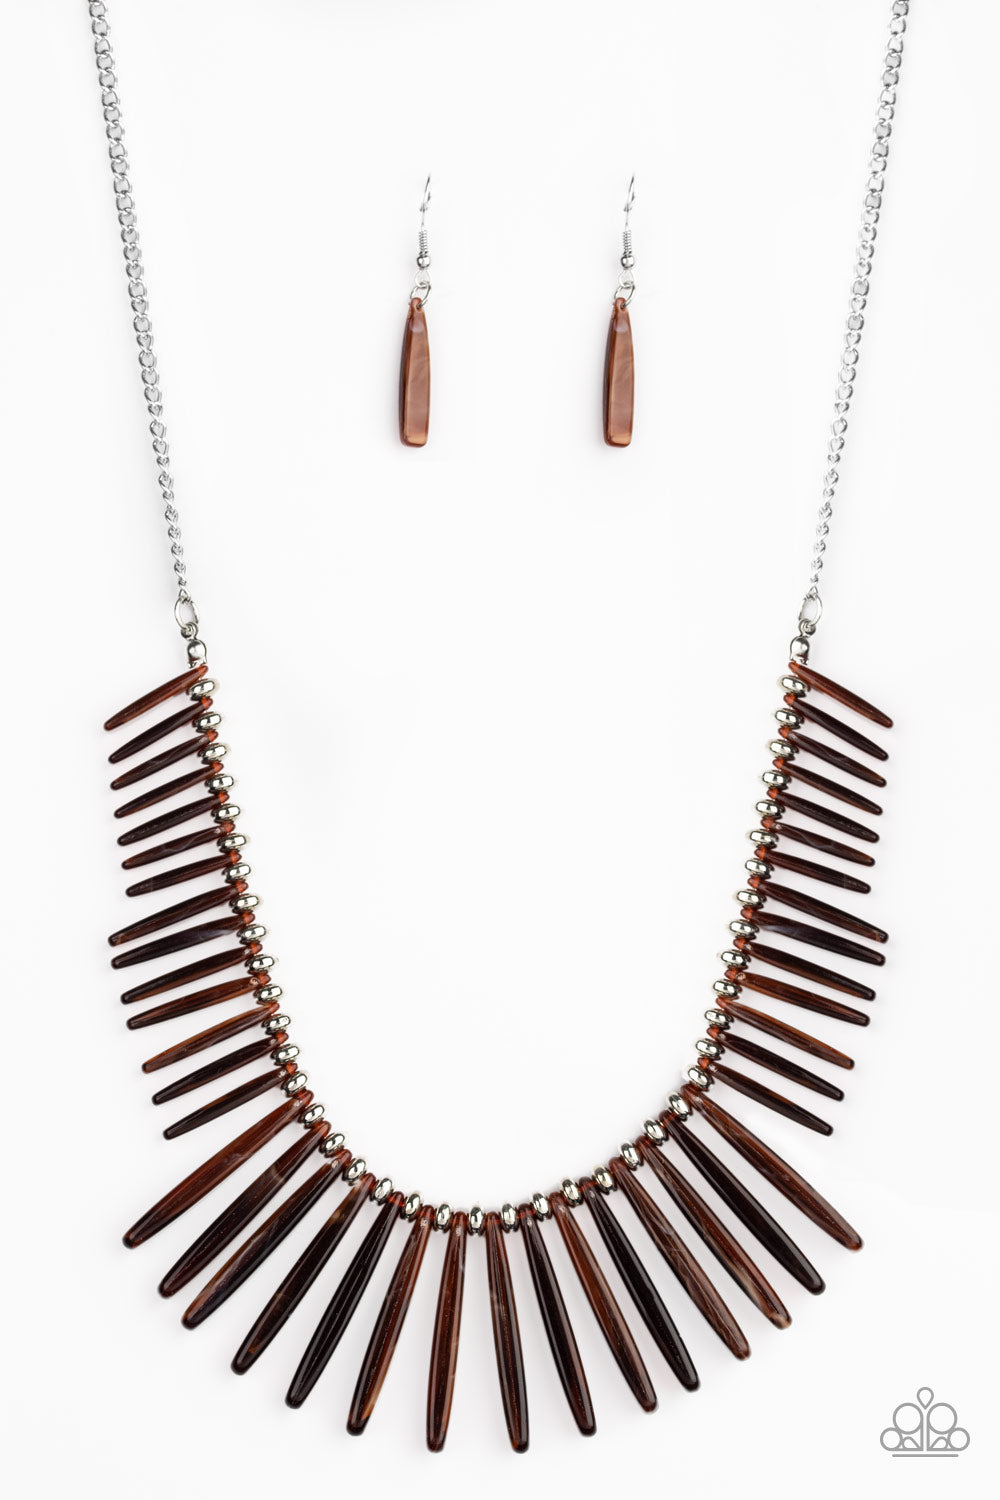 Out of My Element - Brown Necklace